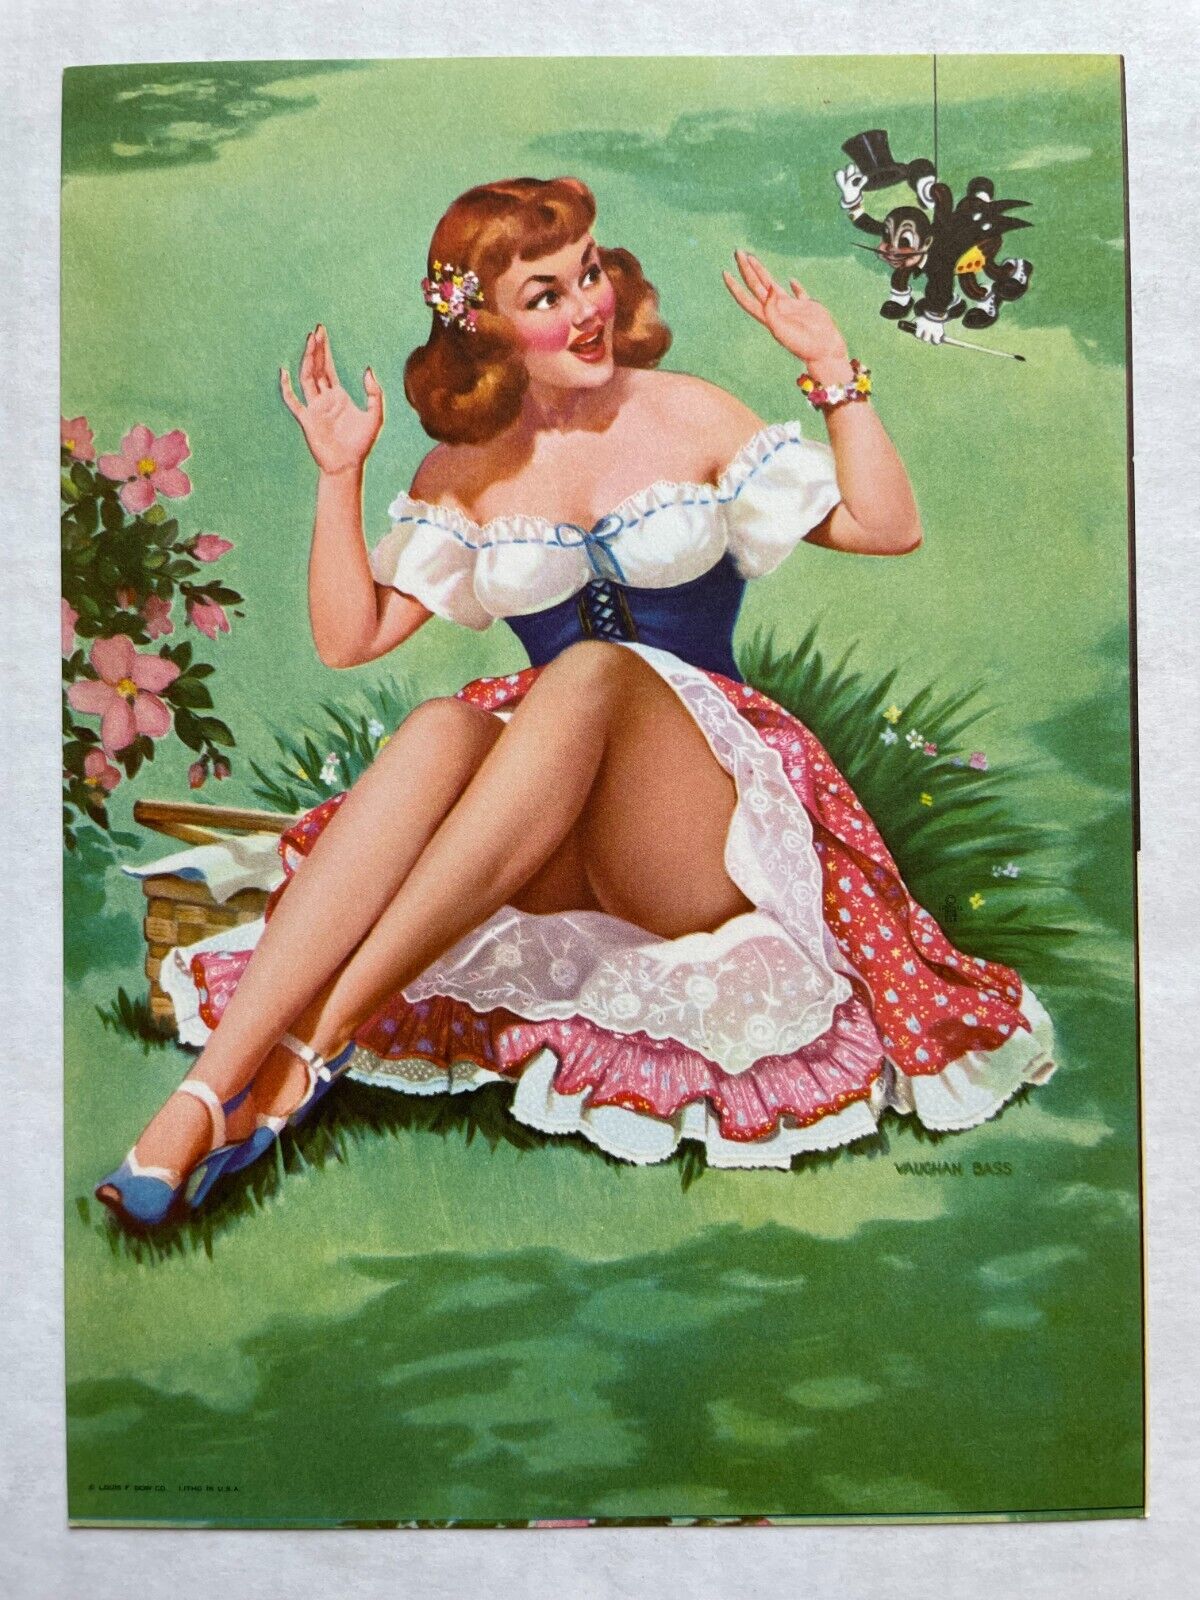 Vintage 1950-60's SMALL Pinup Girl Picture Little Miss Muffet by Vaughan Bass